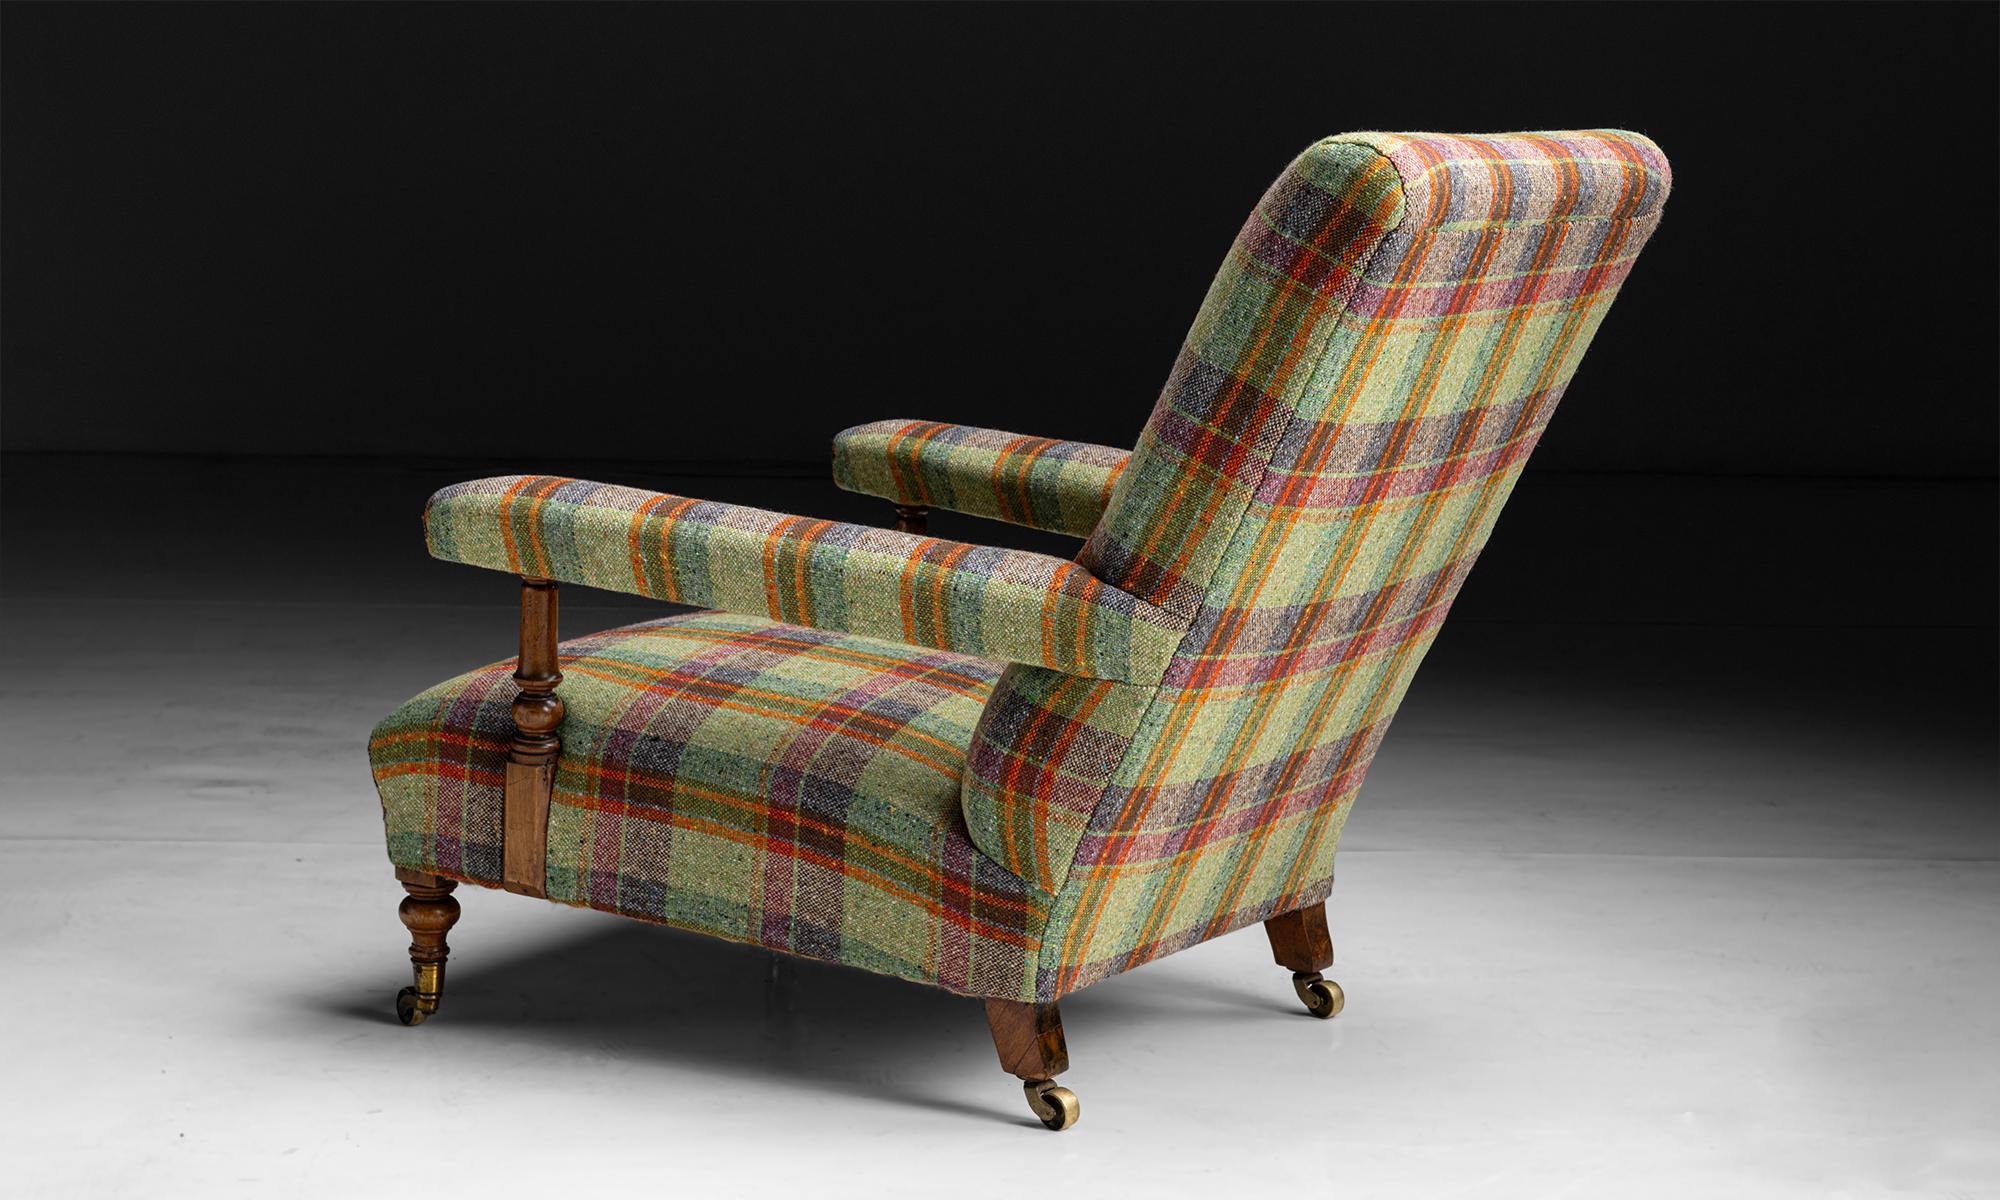 Late 19th Century Howard & Sons Armchair in Tweed by Pierre Frey, England 1871